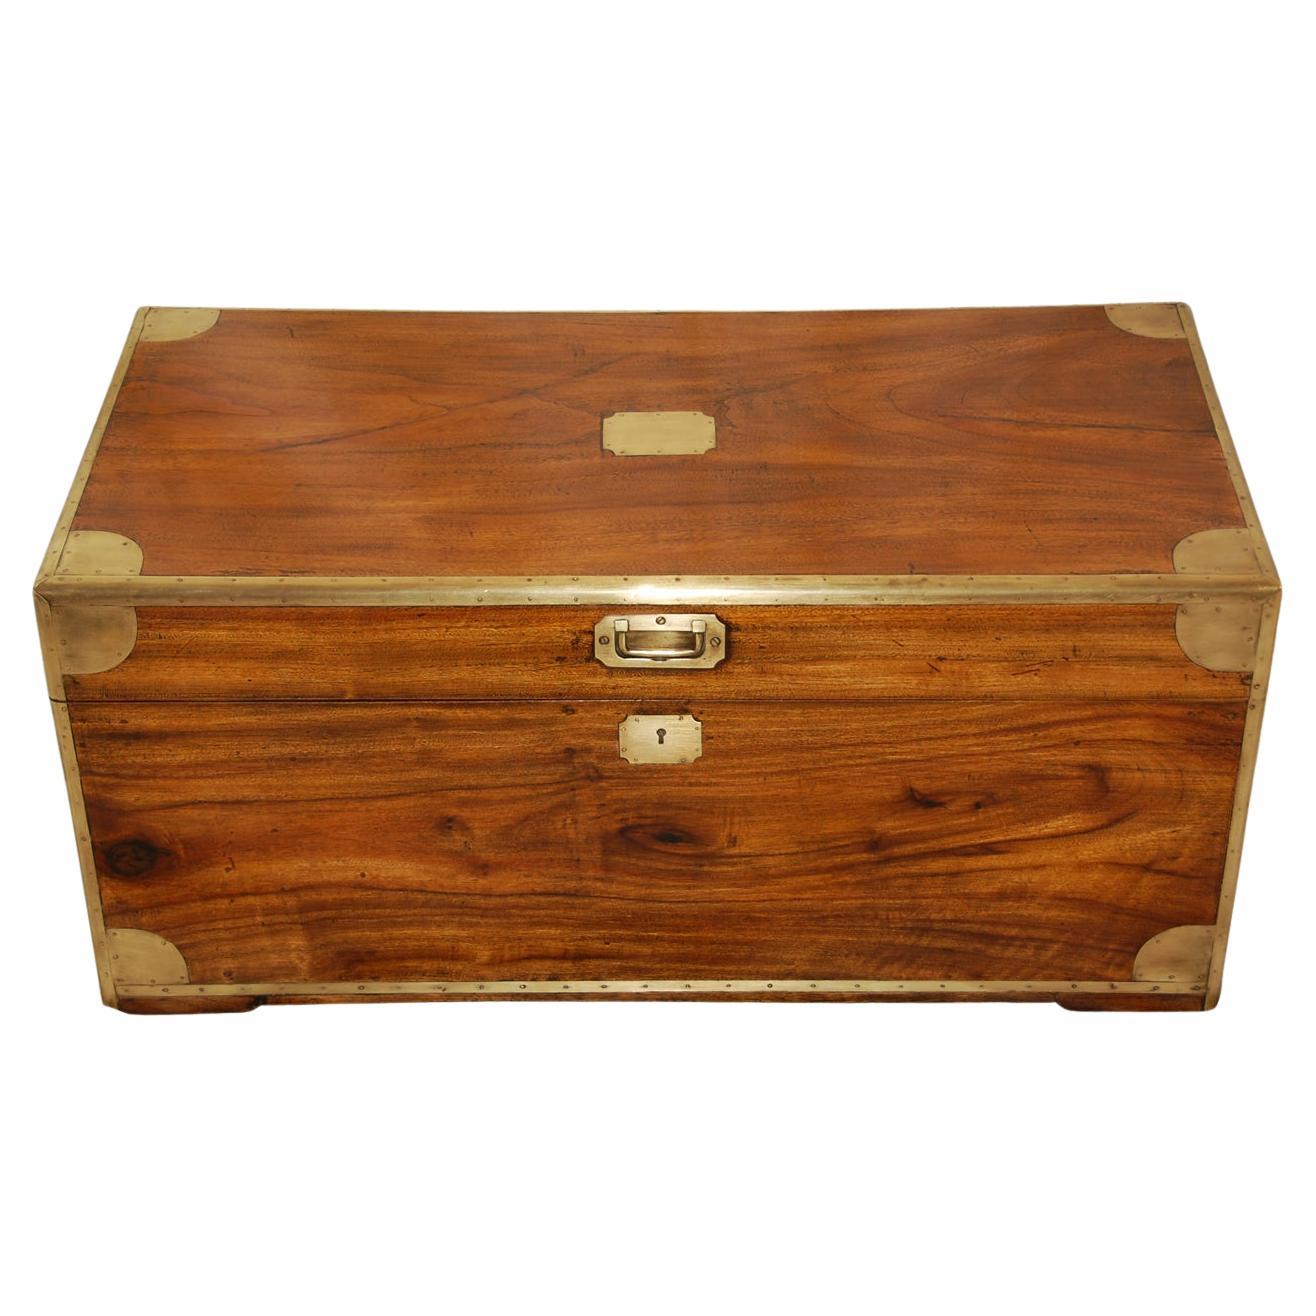 English Mid-19th Century Military Camphor Wood Brass Bound Chest or Trunk 